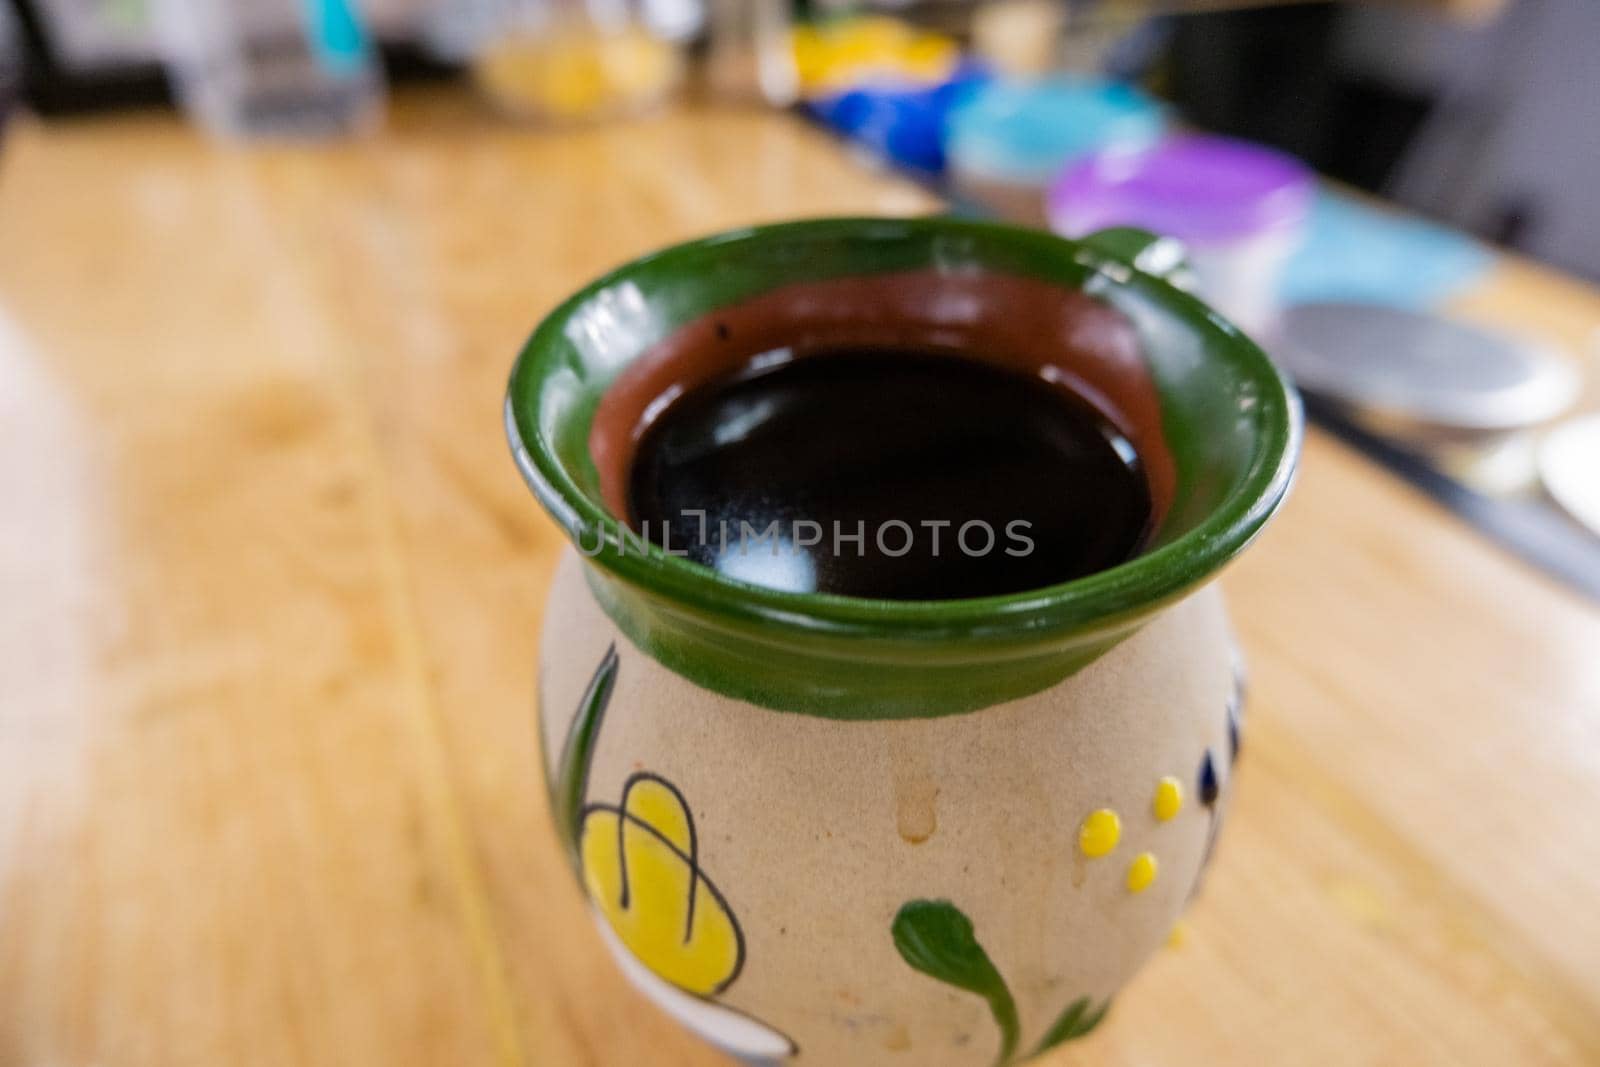 Mexican clay cup filled with coffee on wooden kitchen counter with blurry background. Traditional flowered green and gray craft mug on wood counter. Mexican handcrafts